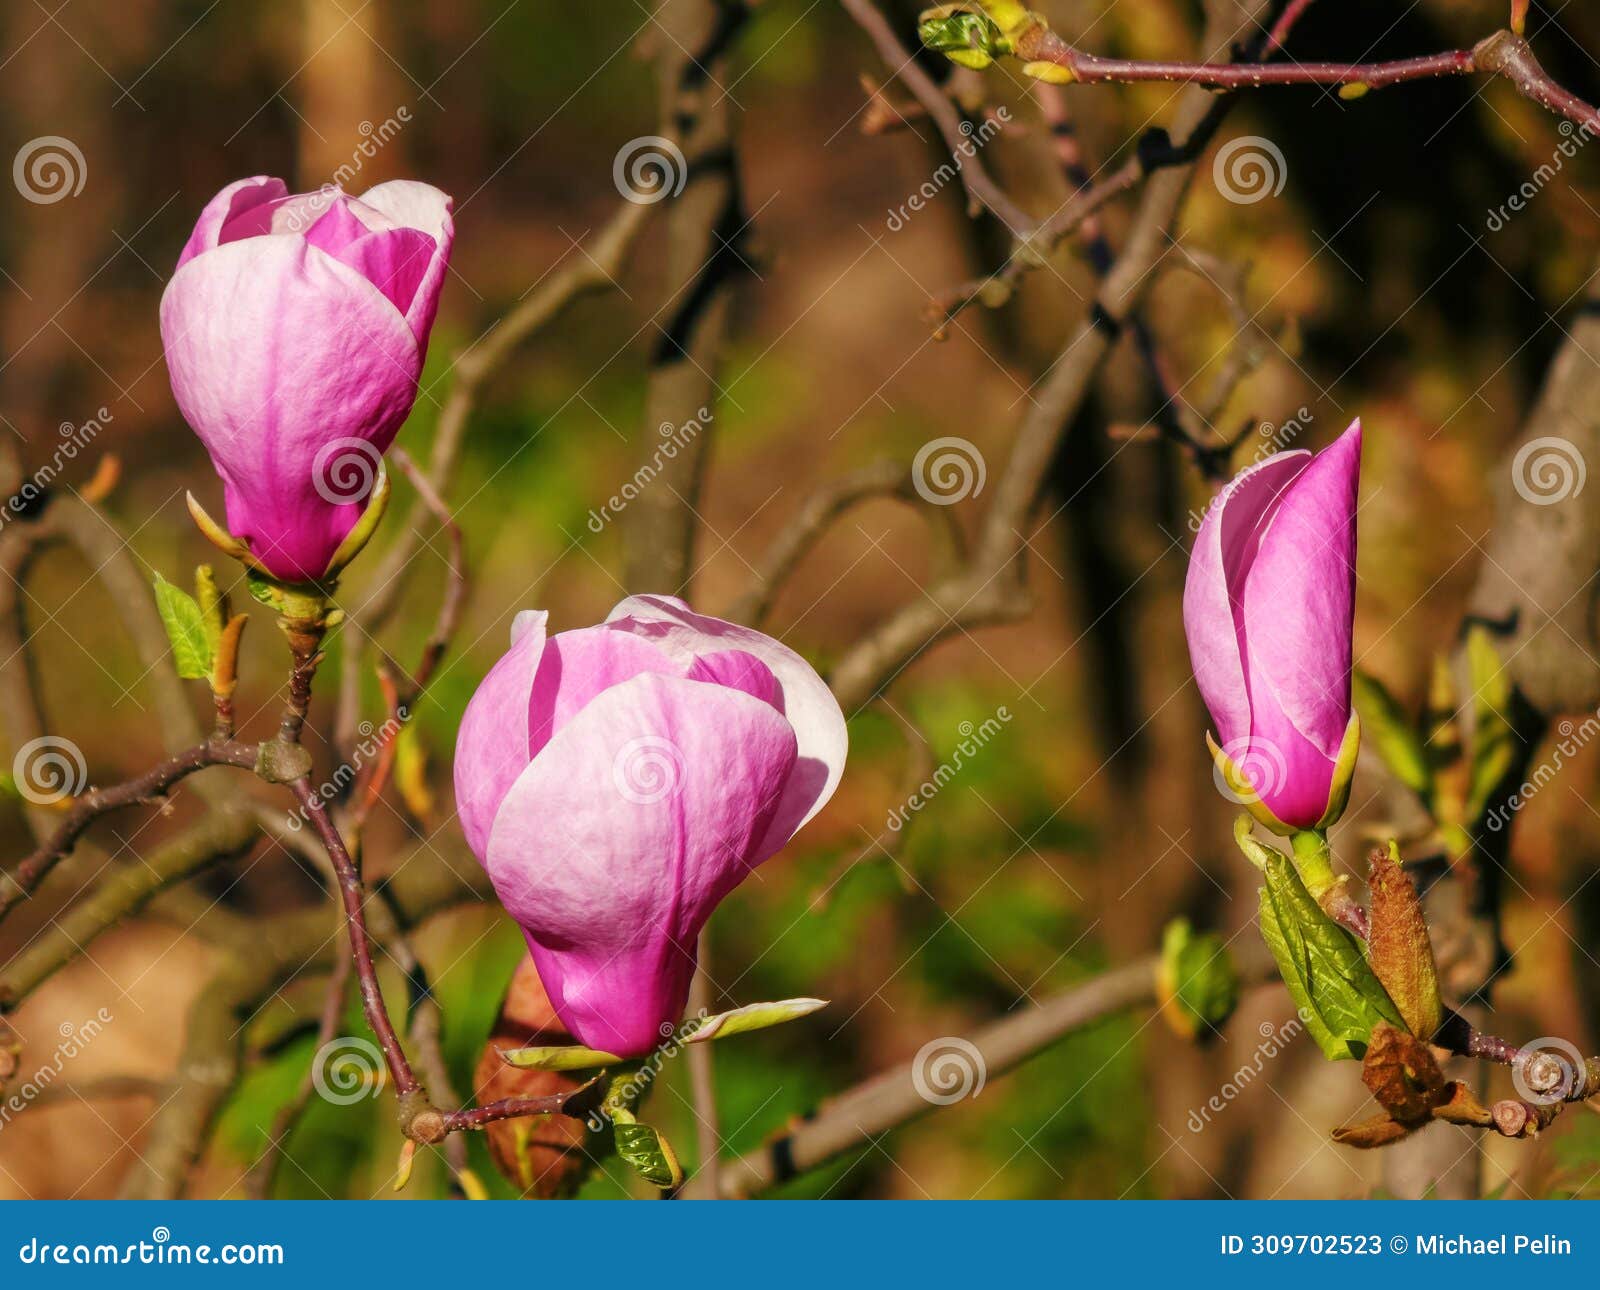 purple flowers of magnolia liliiflora blooming on the branch